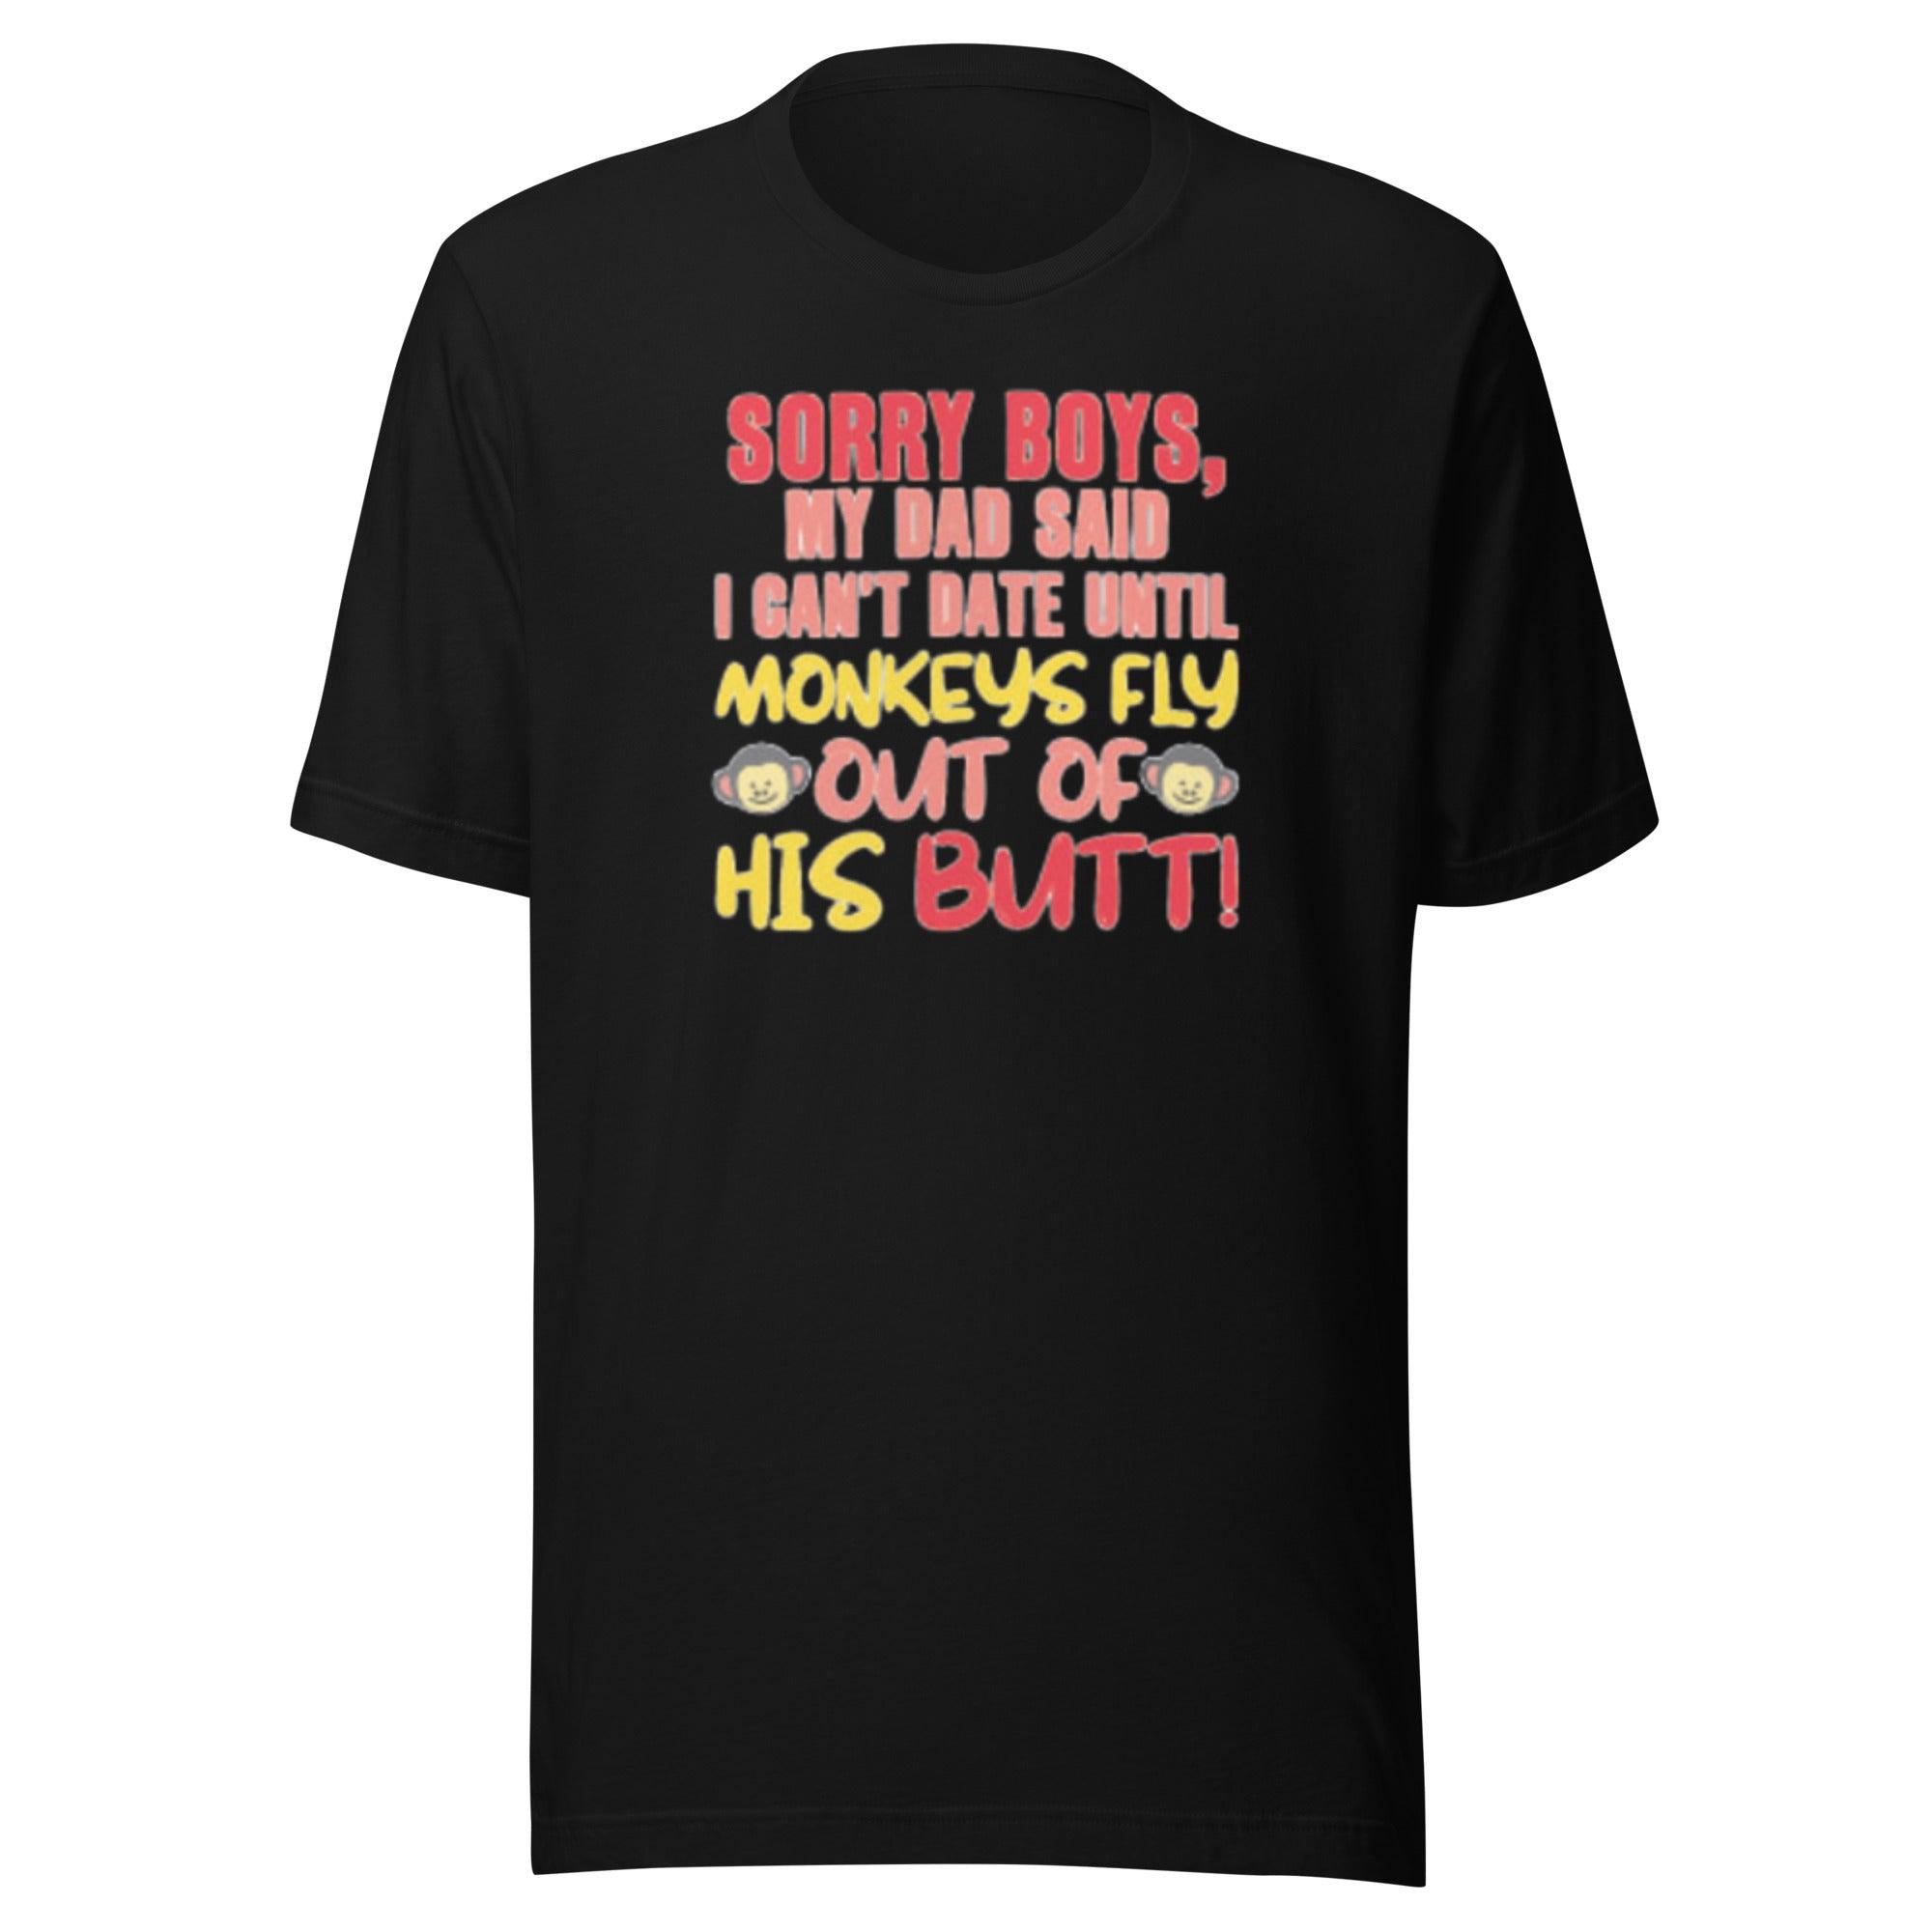 Dad Said I Can't Date Until Monkeys Fly Out of His Butt Short Sleeve Top